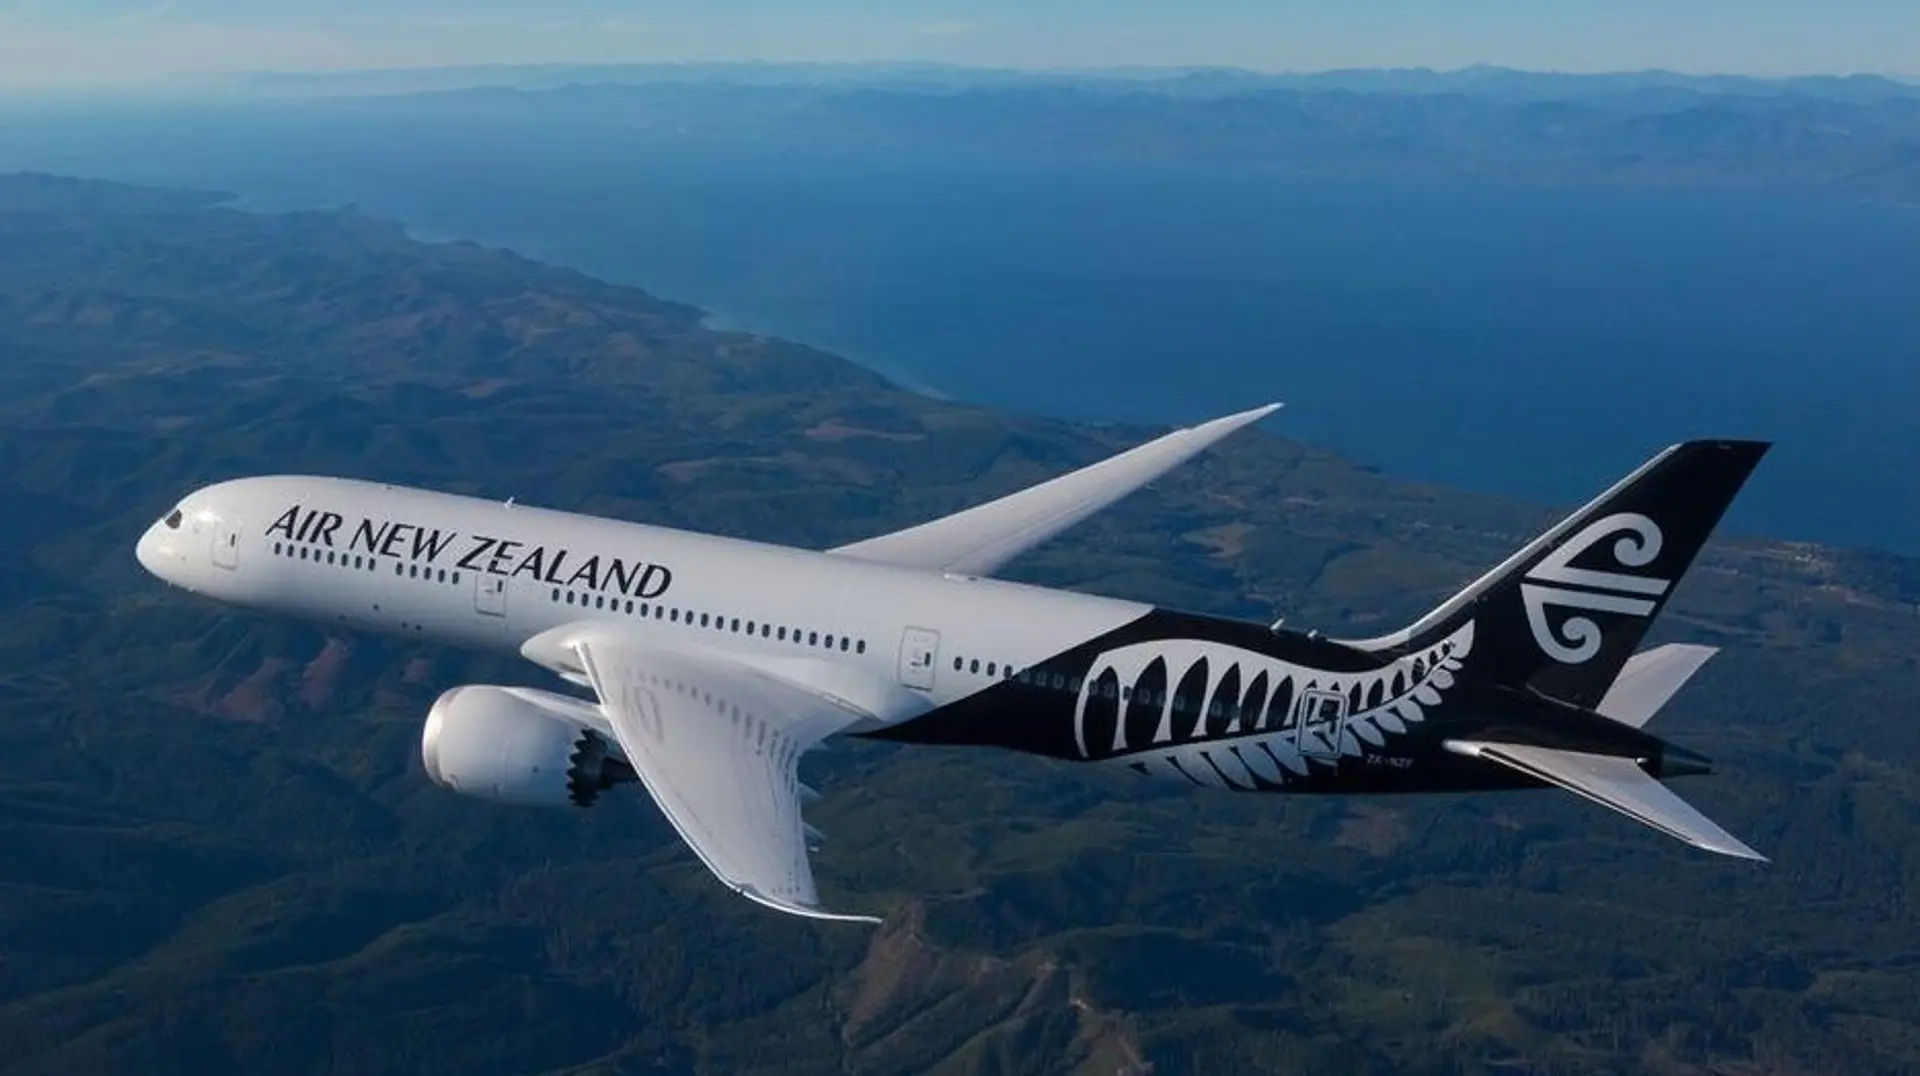 air new zealand's plane in the sky